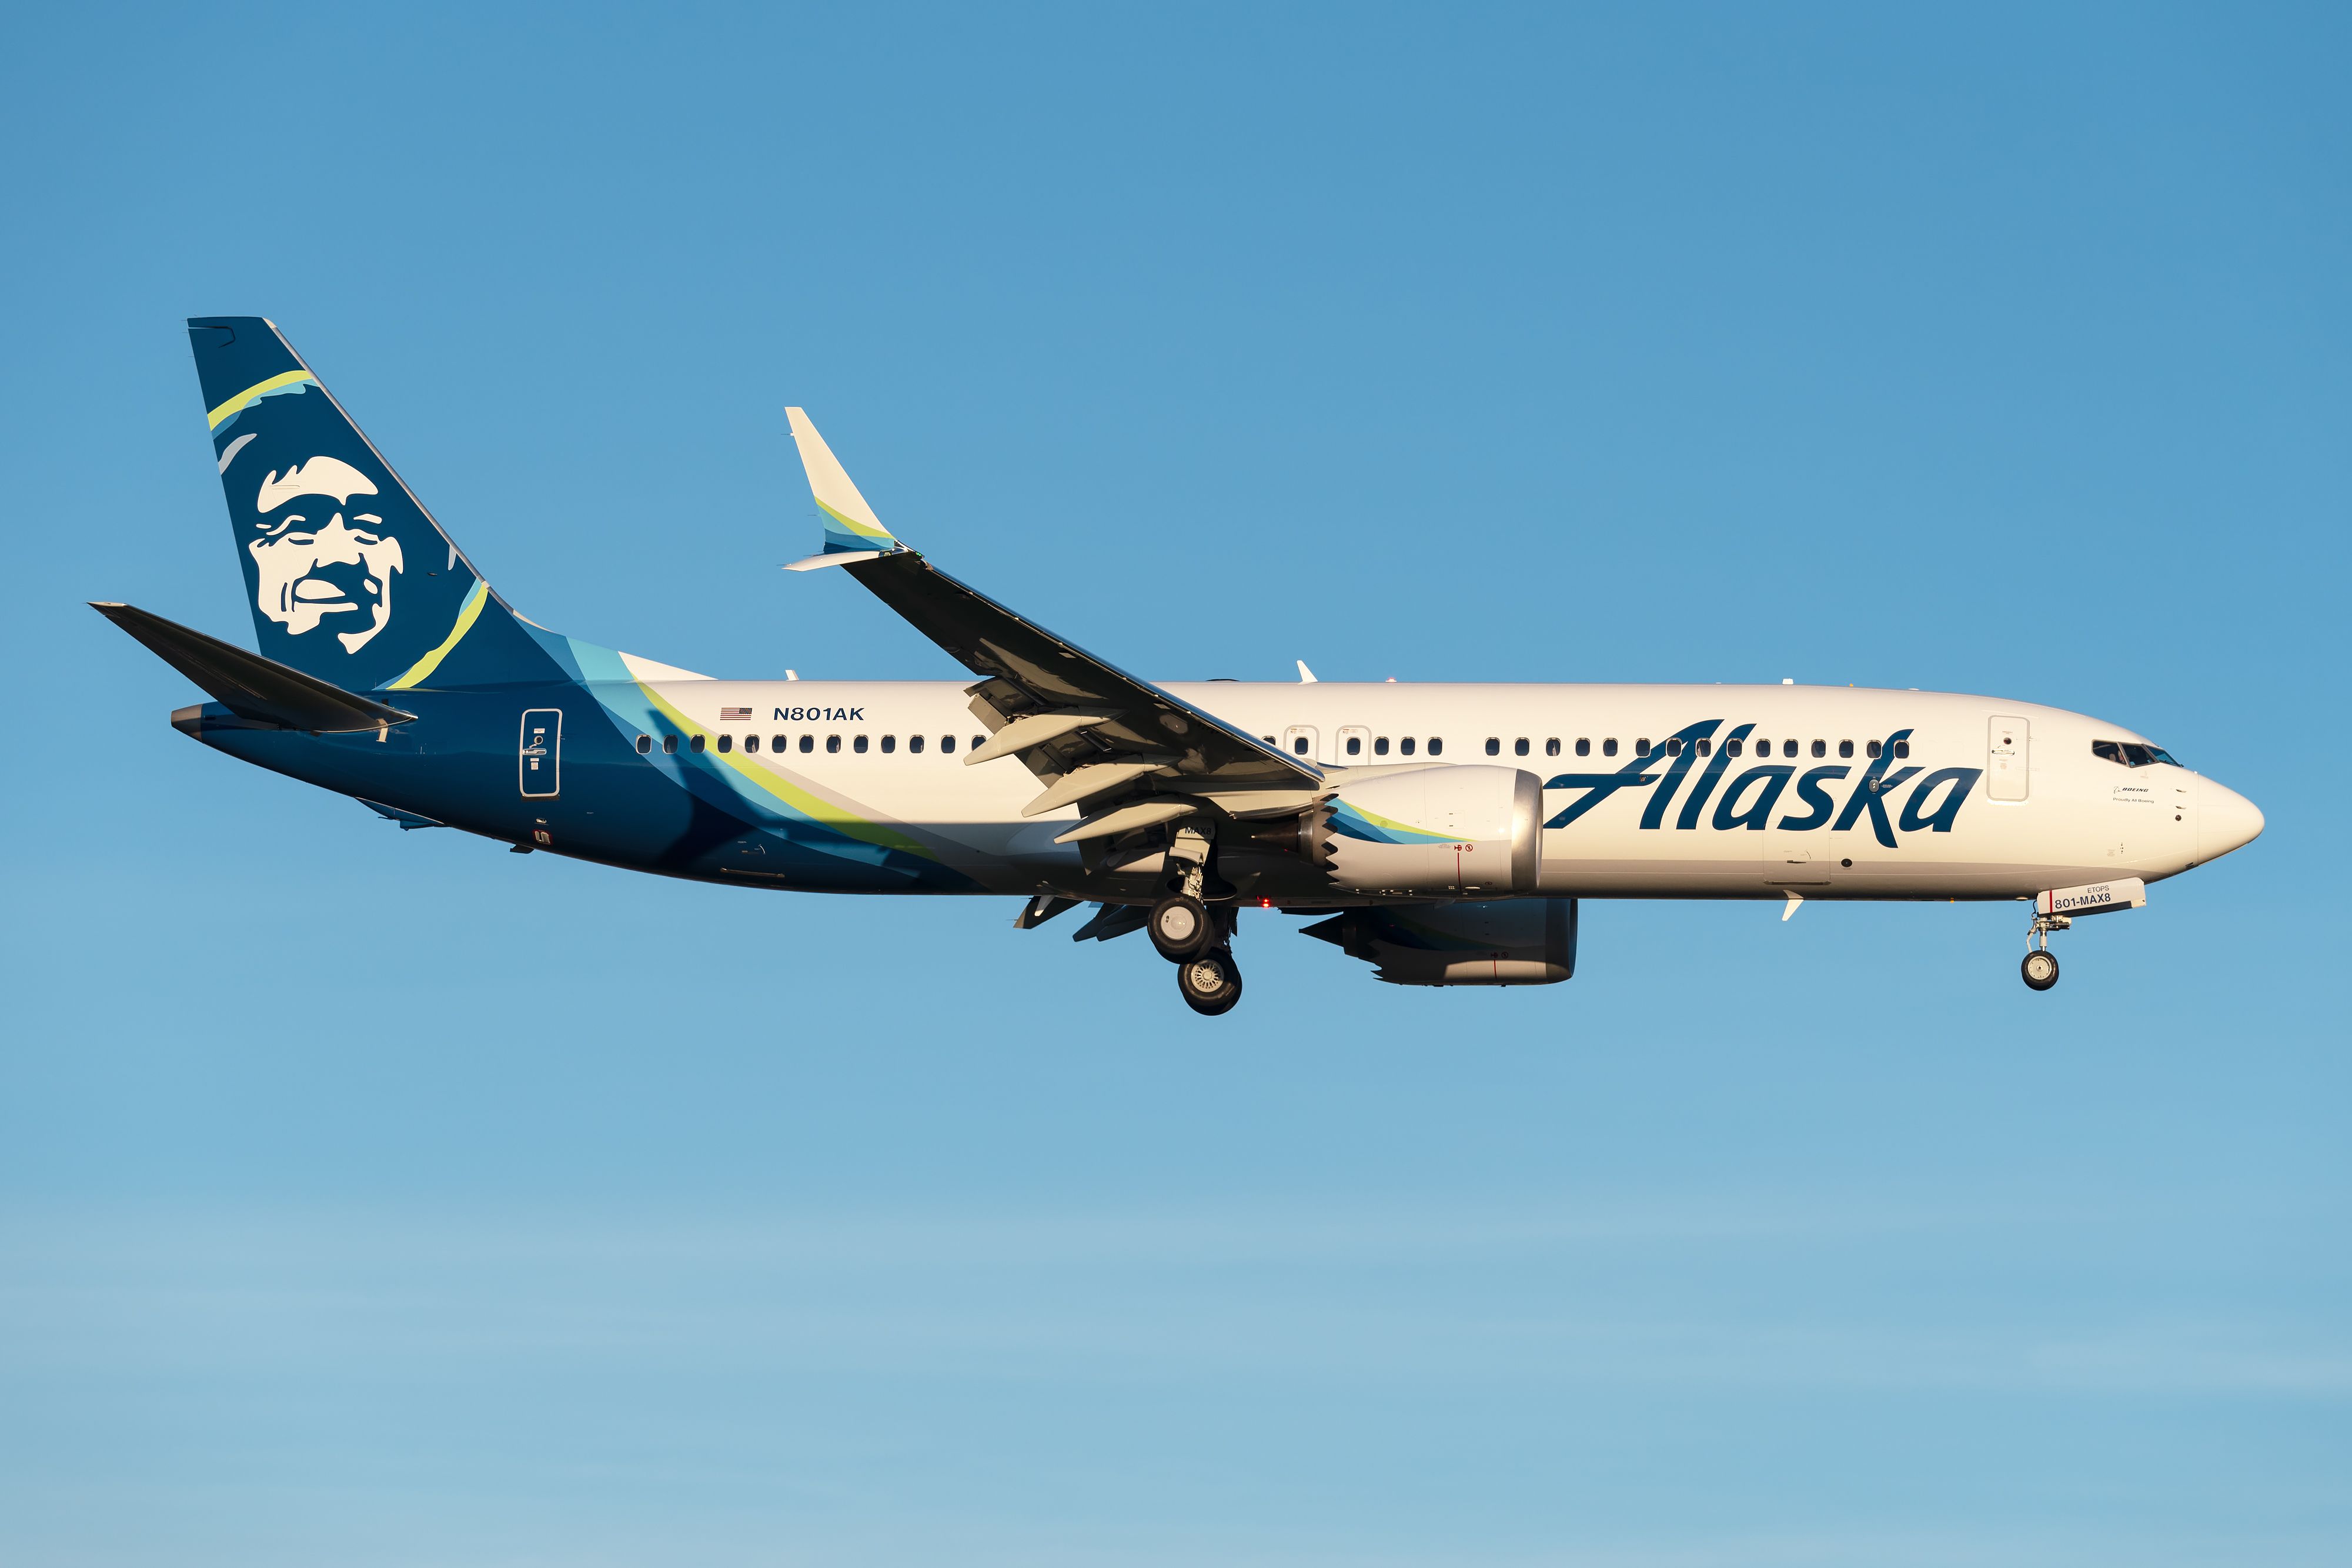 An Alaska Airlines Boeing 737 MAX 8 aircraft flying.